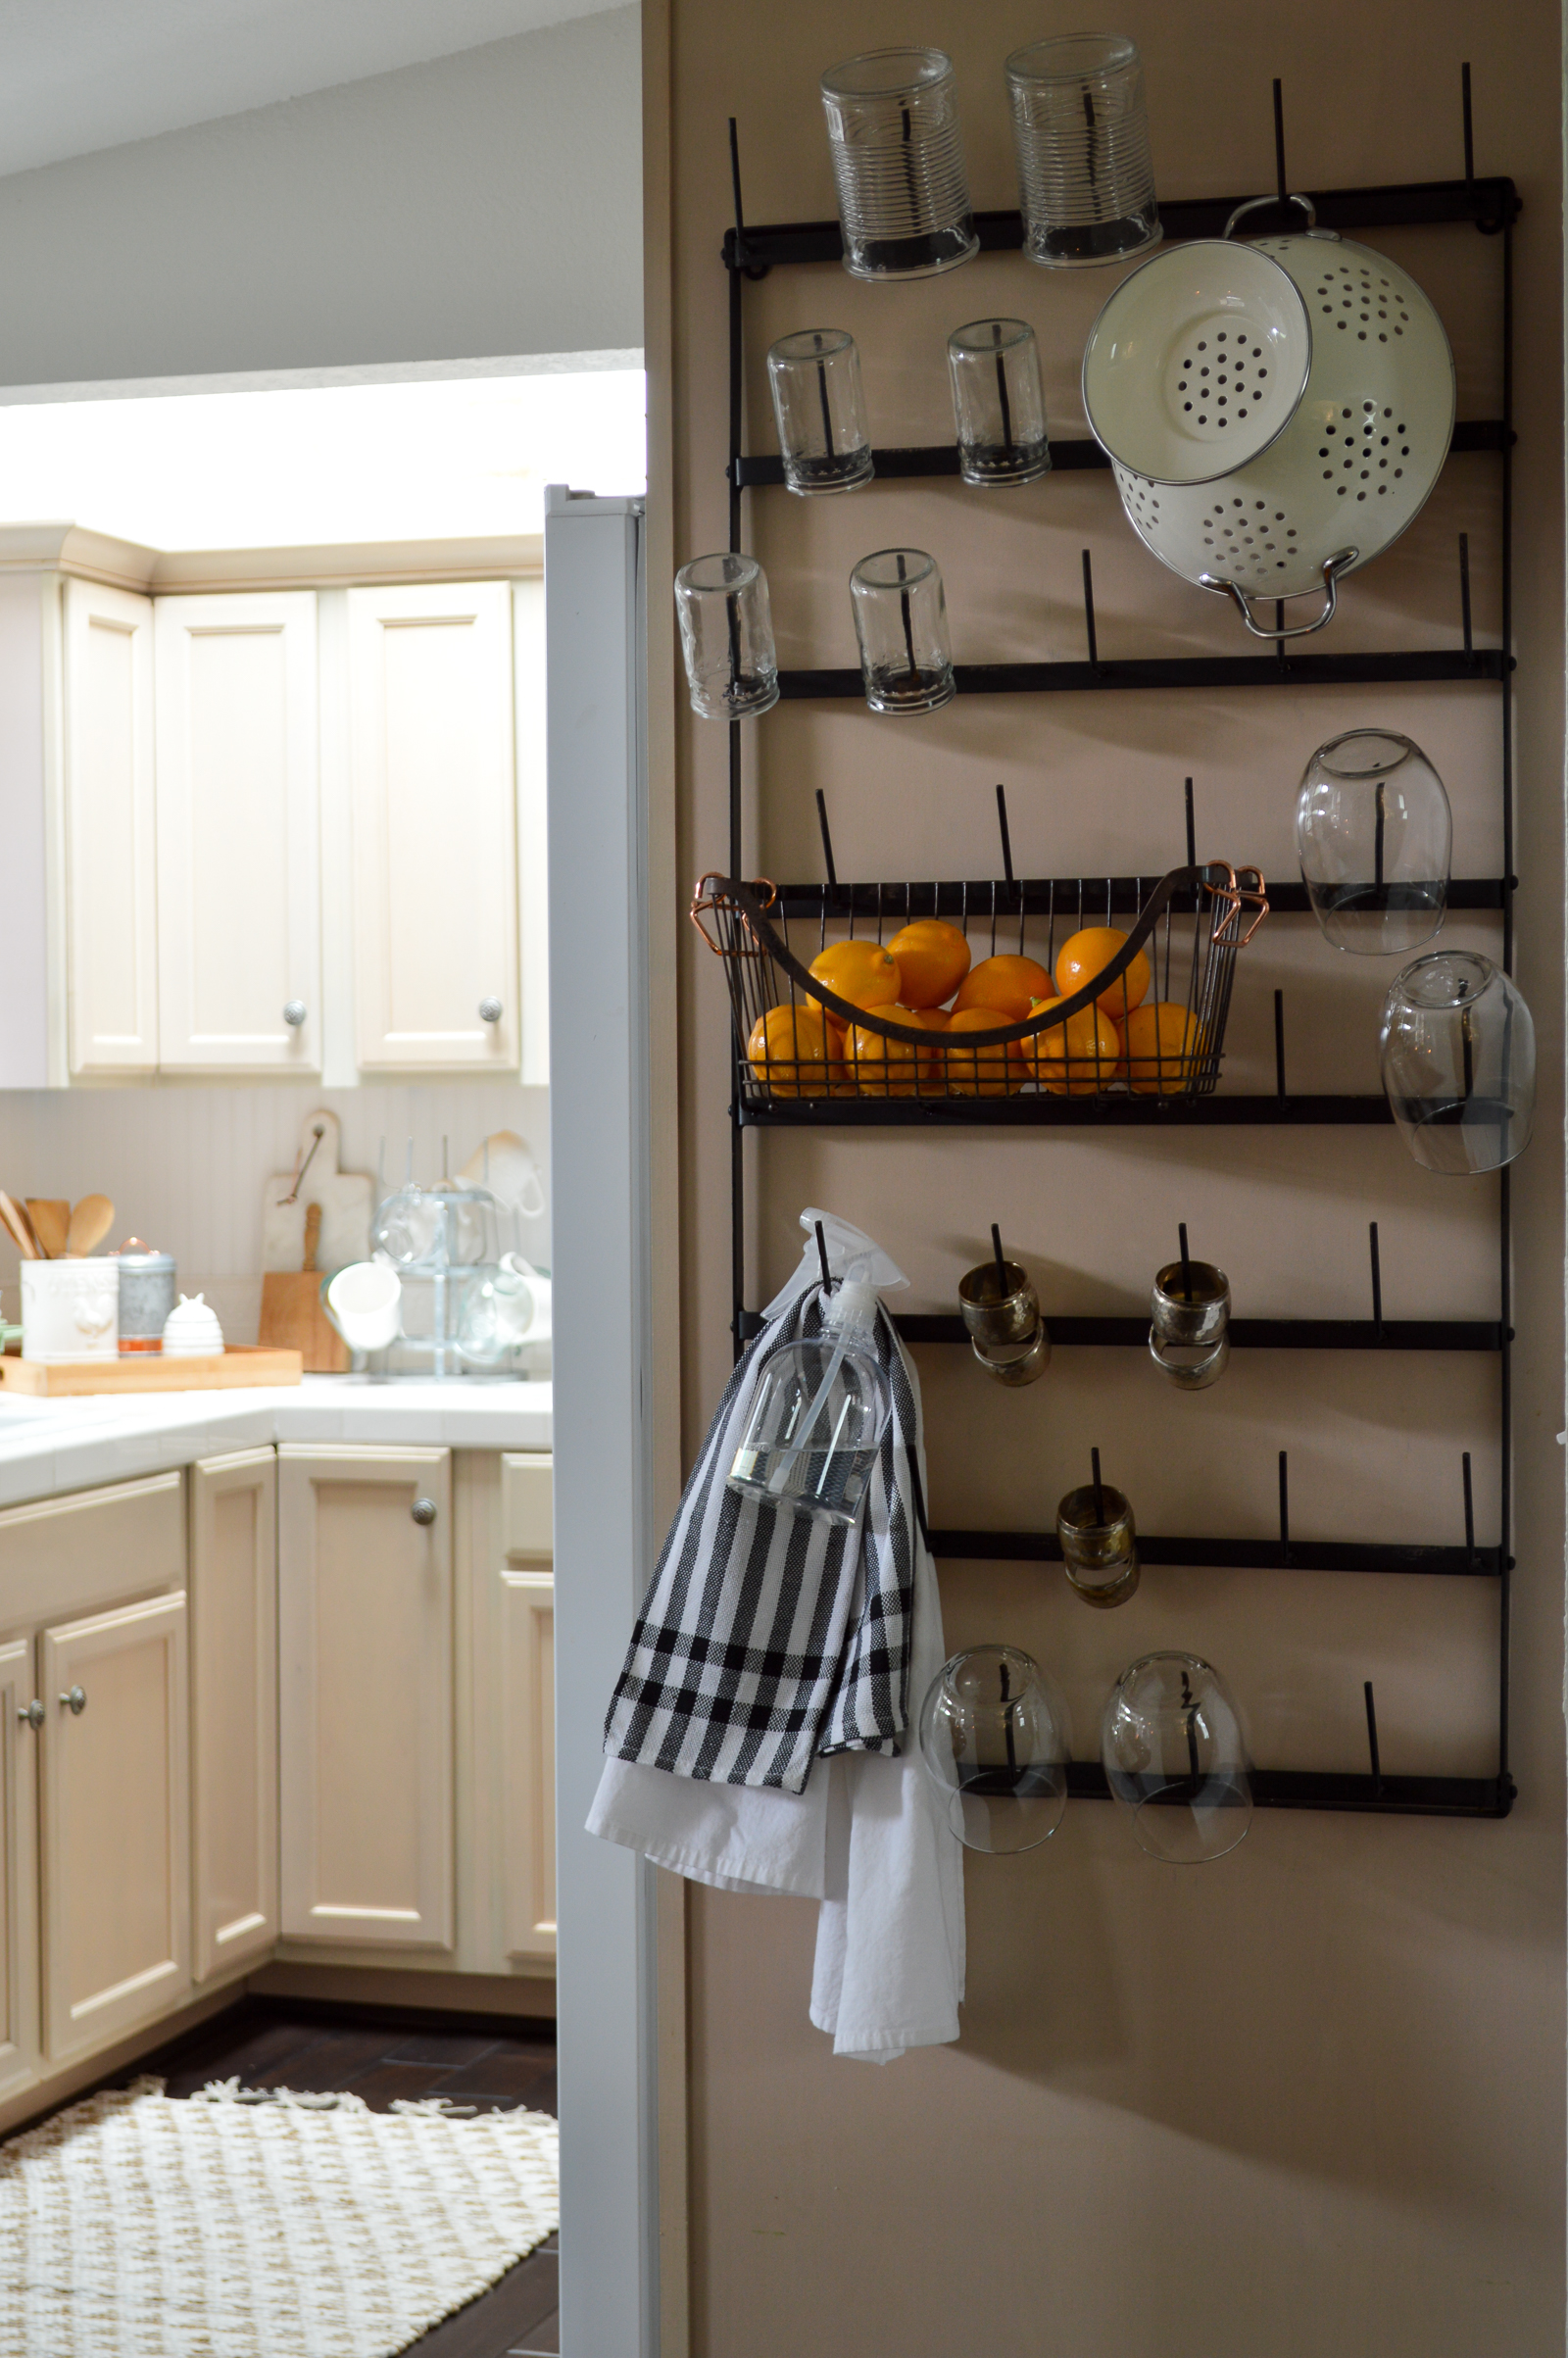 Tips and ideas to purge, clean and organize the kitchen - budget friendly real-life organization details at www.foxhollowcottage.com #sponsored with Better Homes & Gardens at Walmart